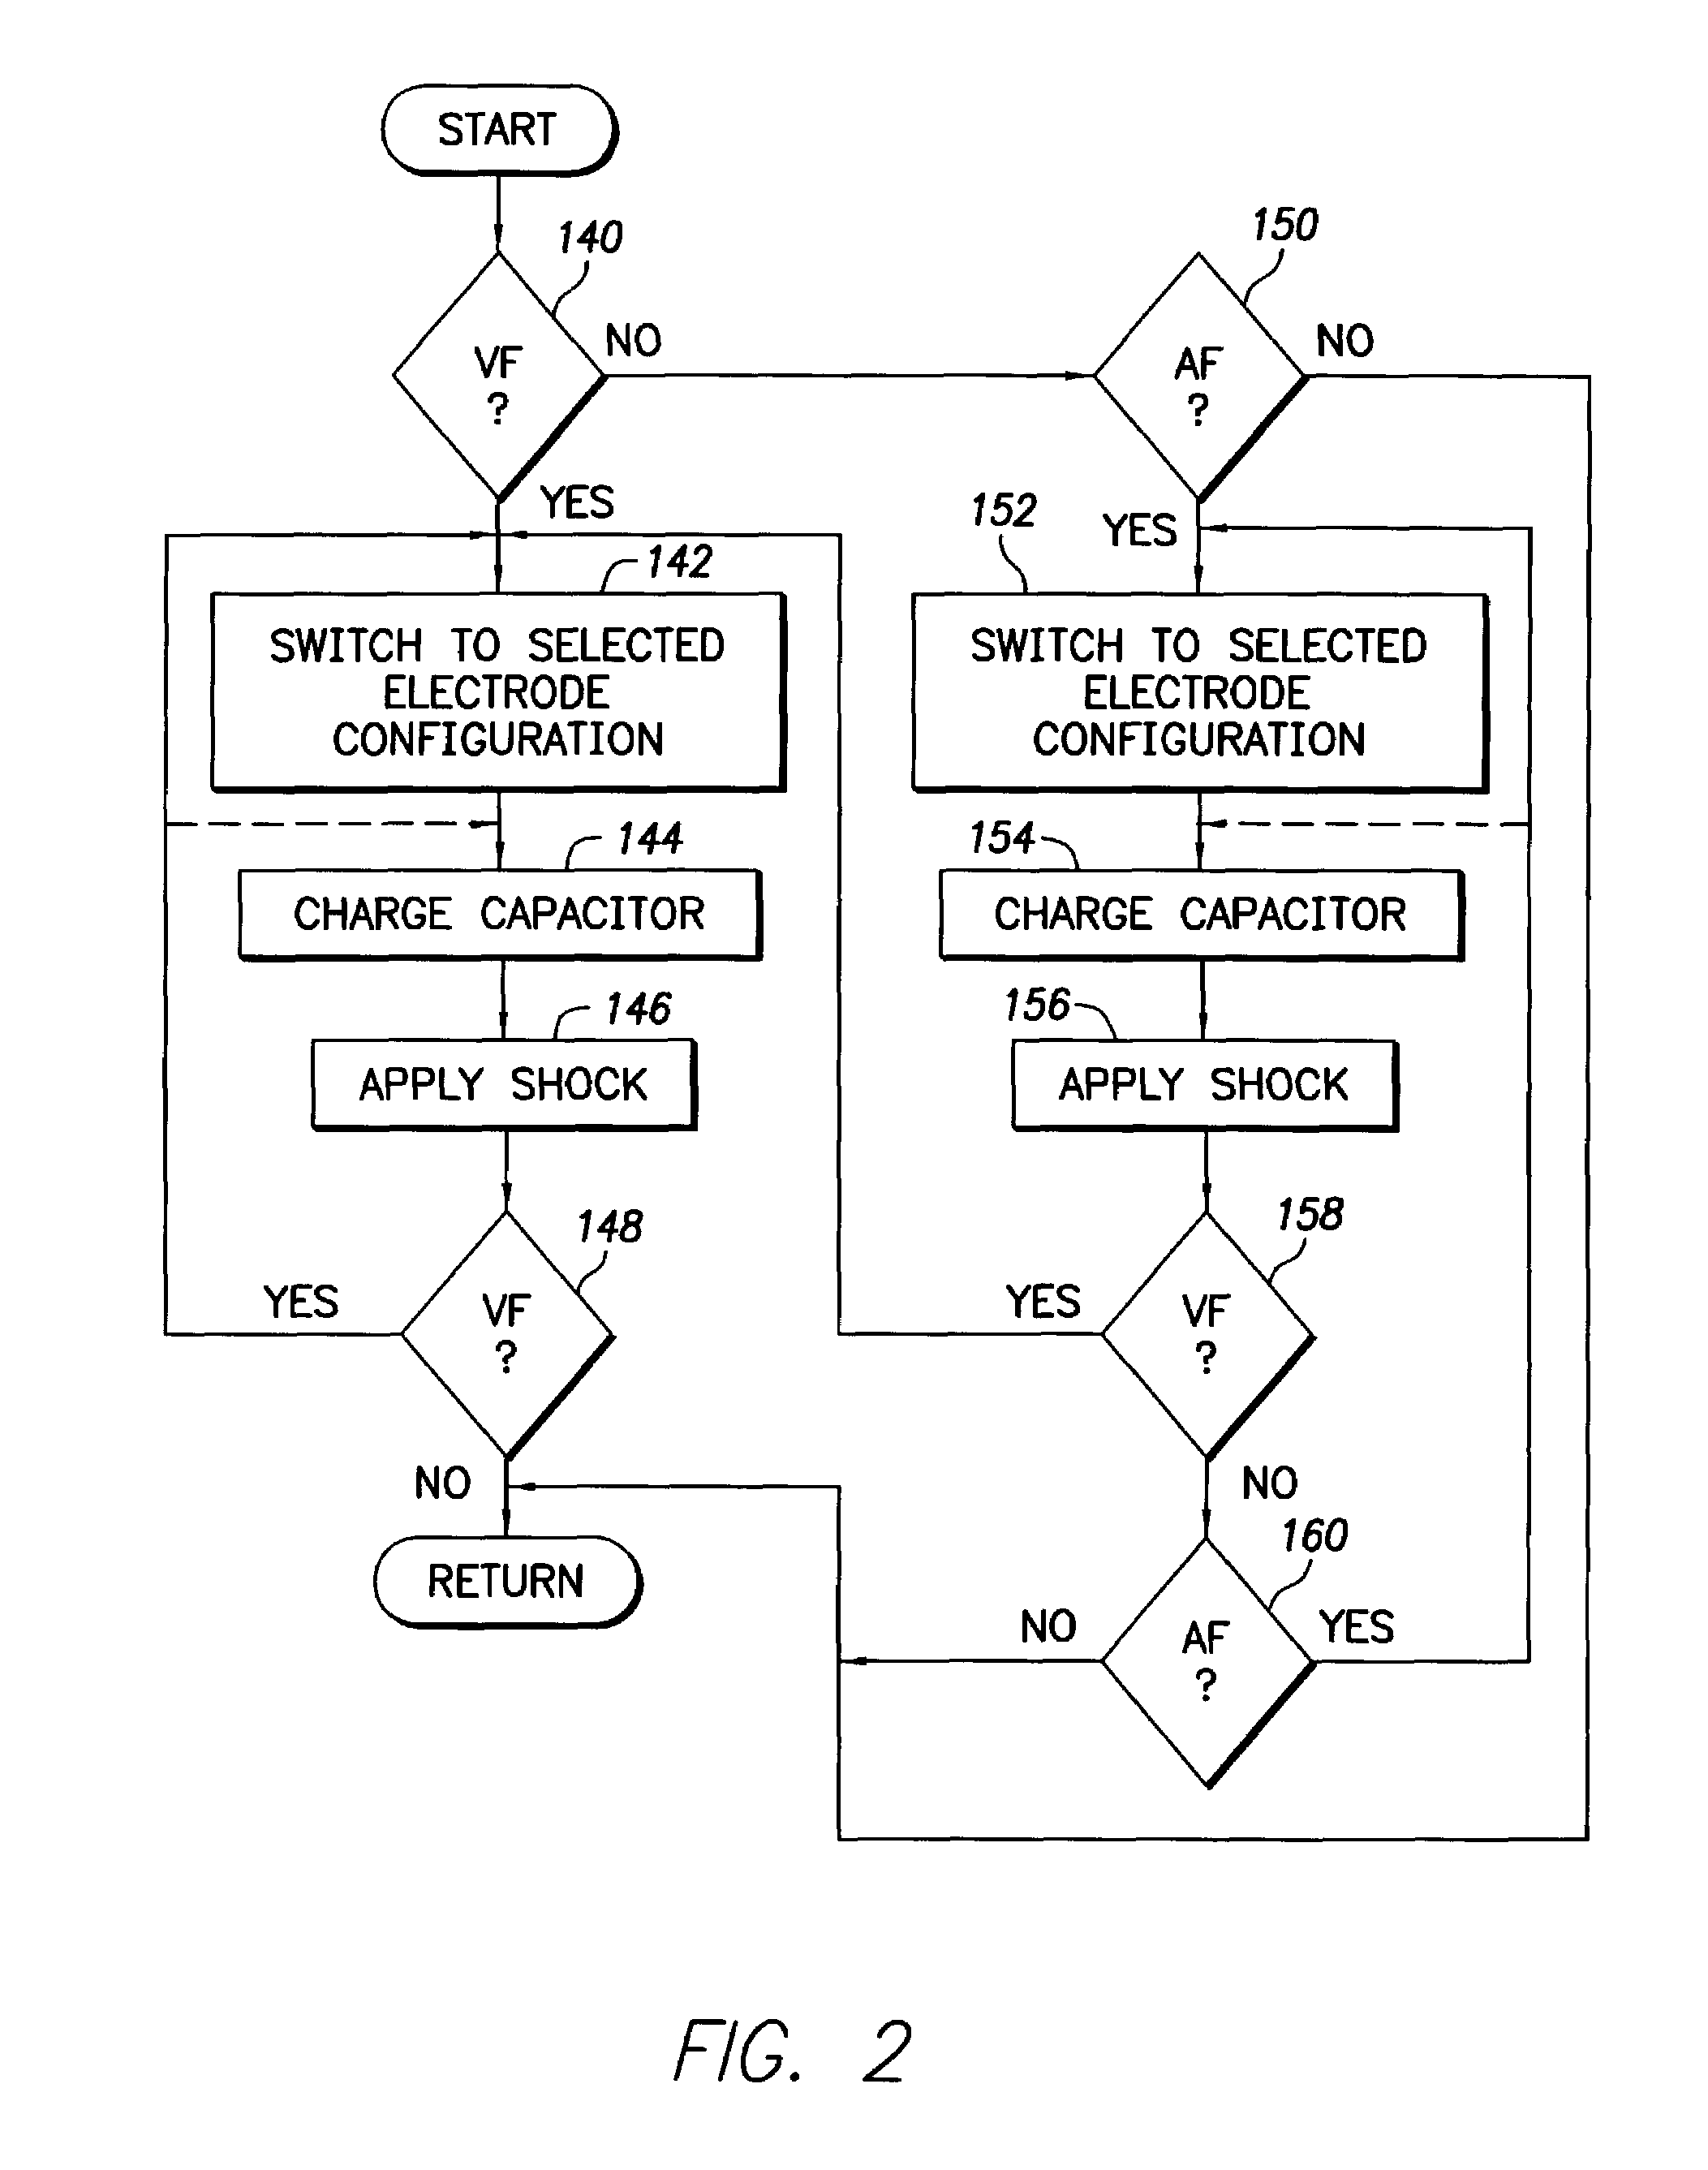 Dual-chamber implantable cardiac stimulation system and device with selectable arrhythmia termination electrode configurations and method